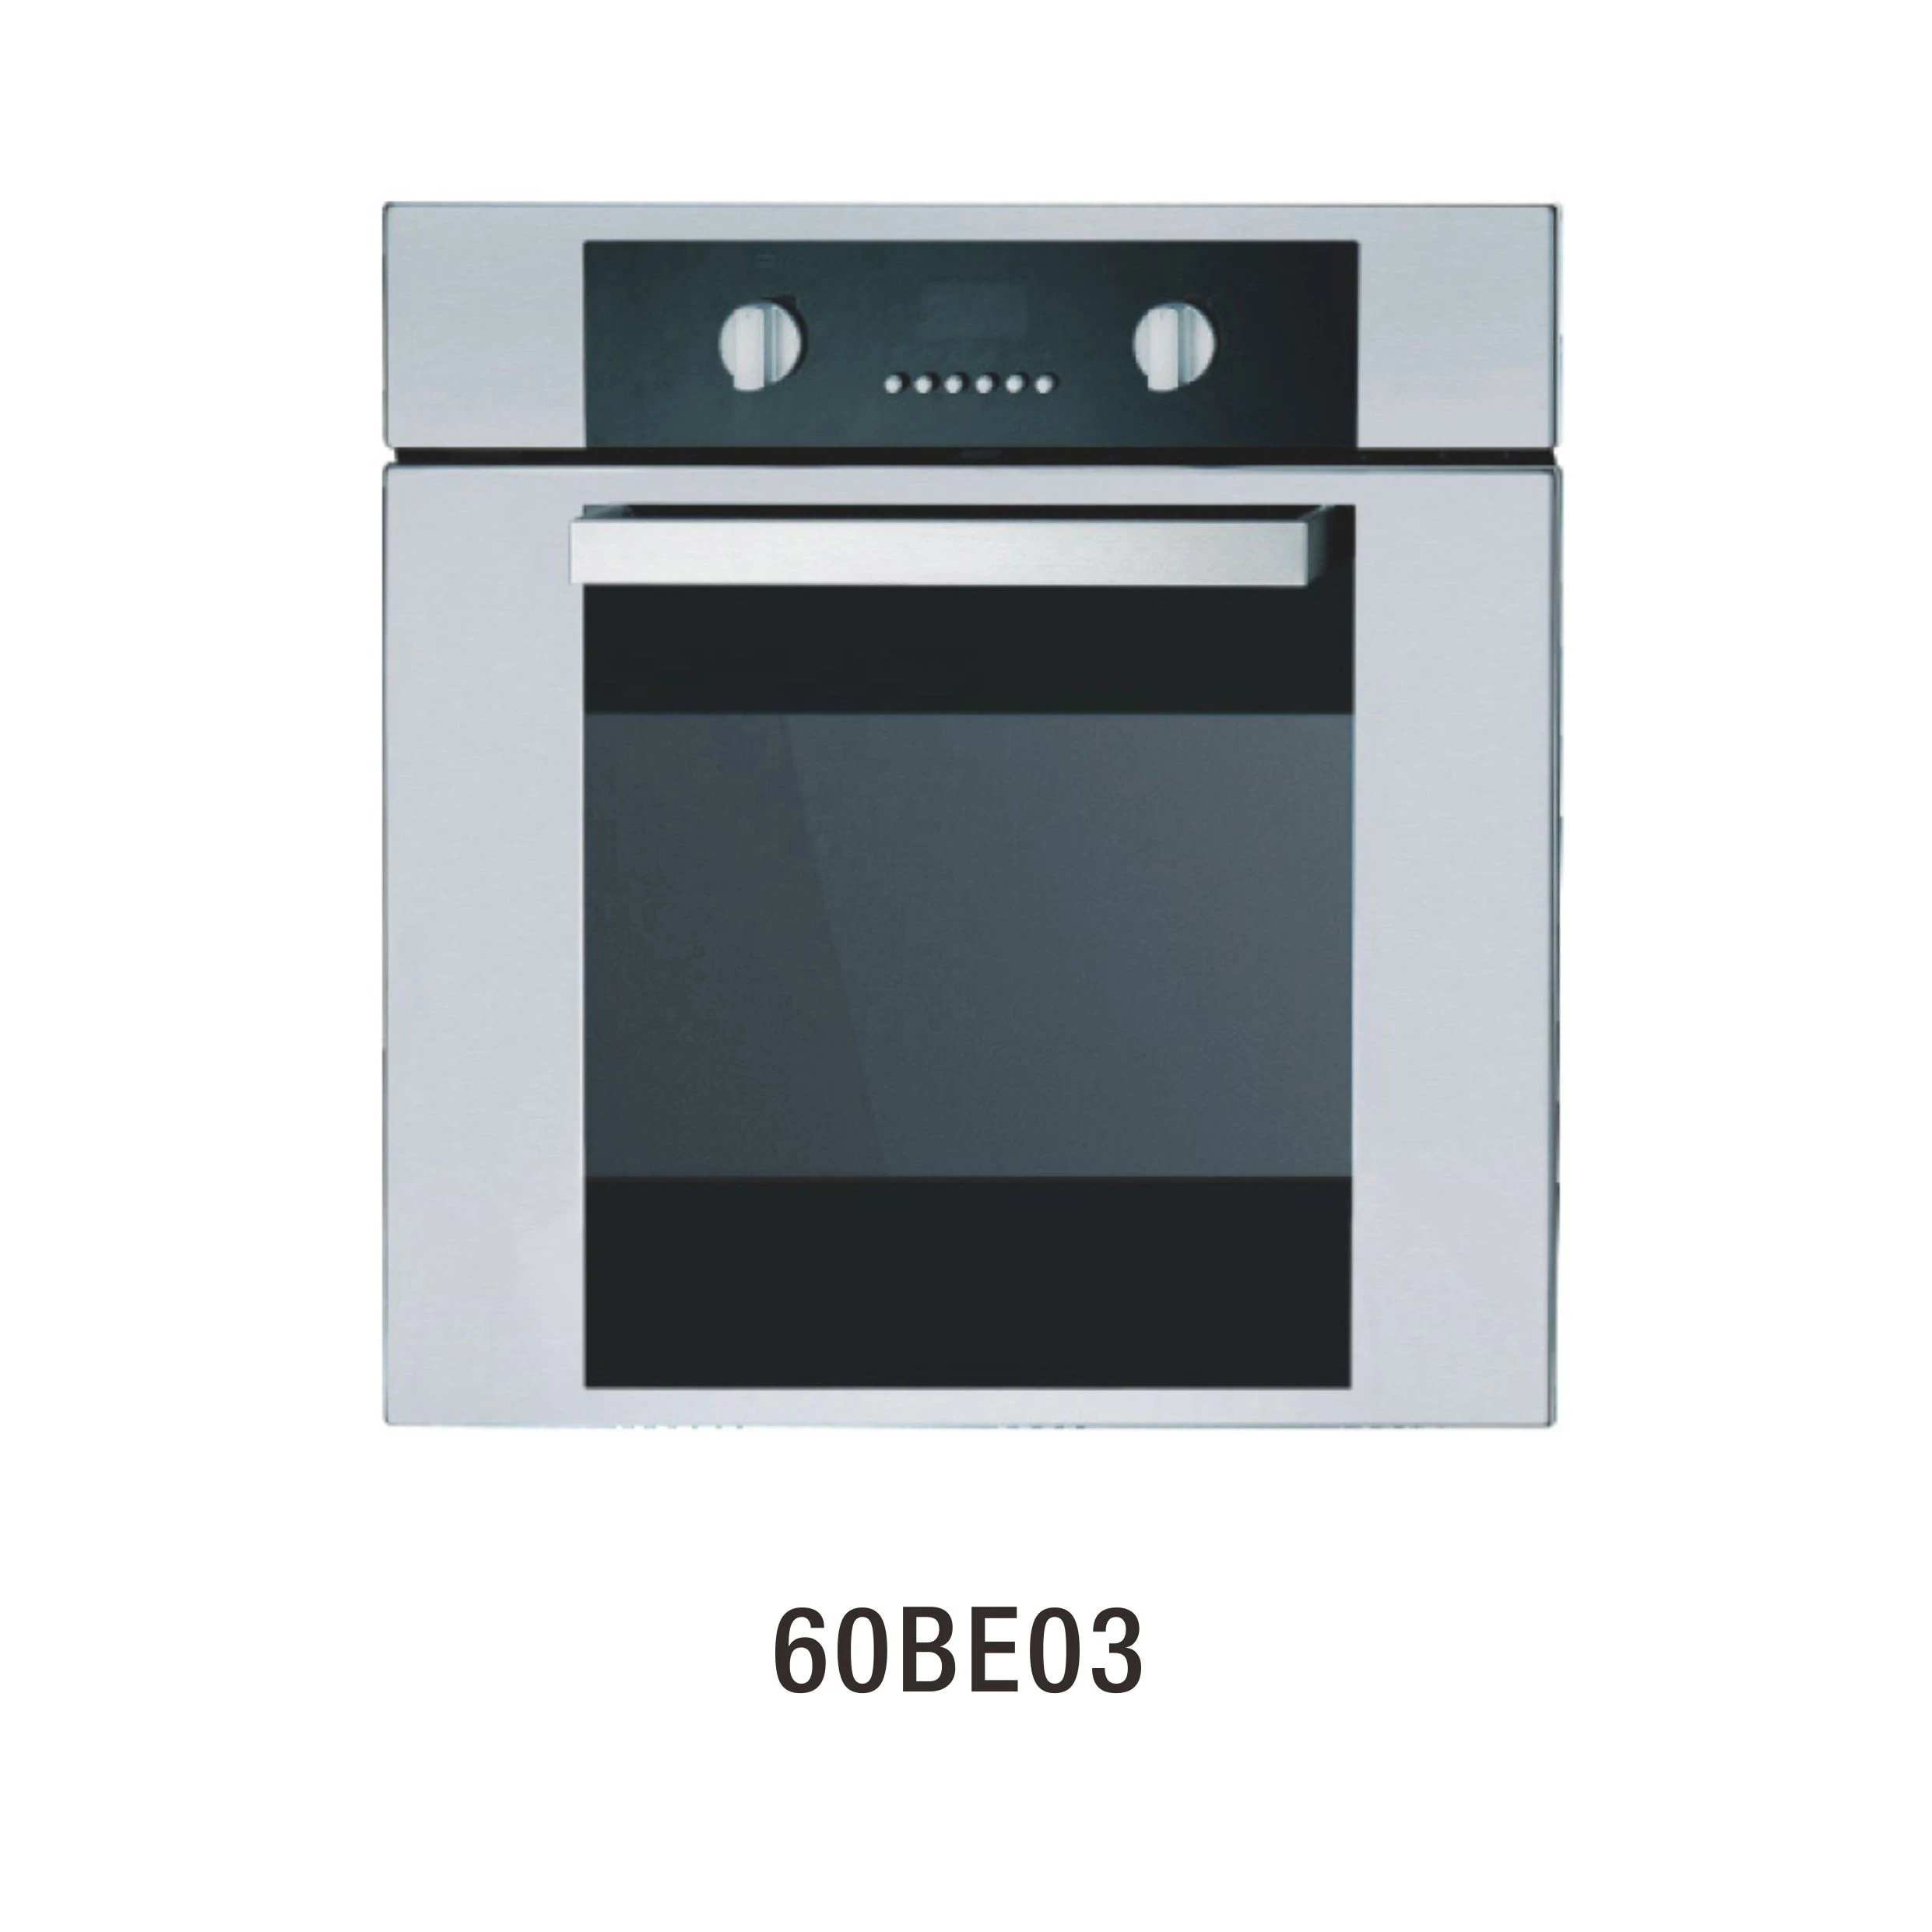 60BE03 electric oven high-speed oven cheap microwave oven